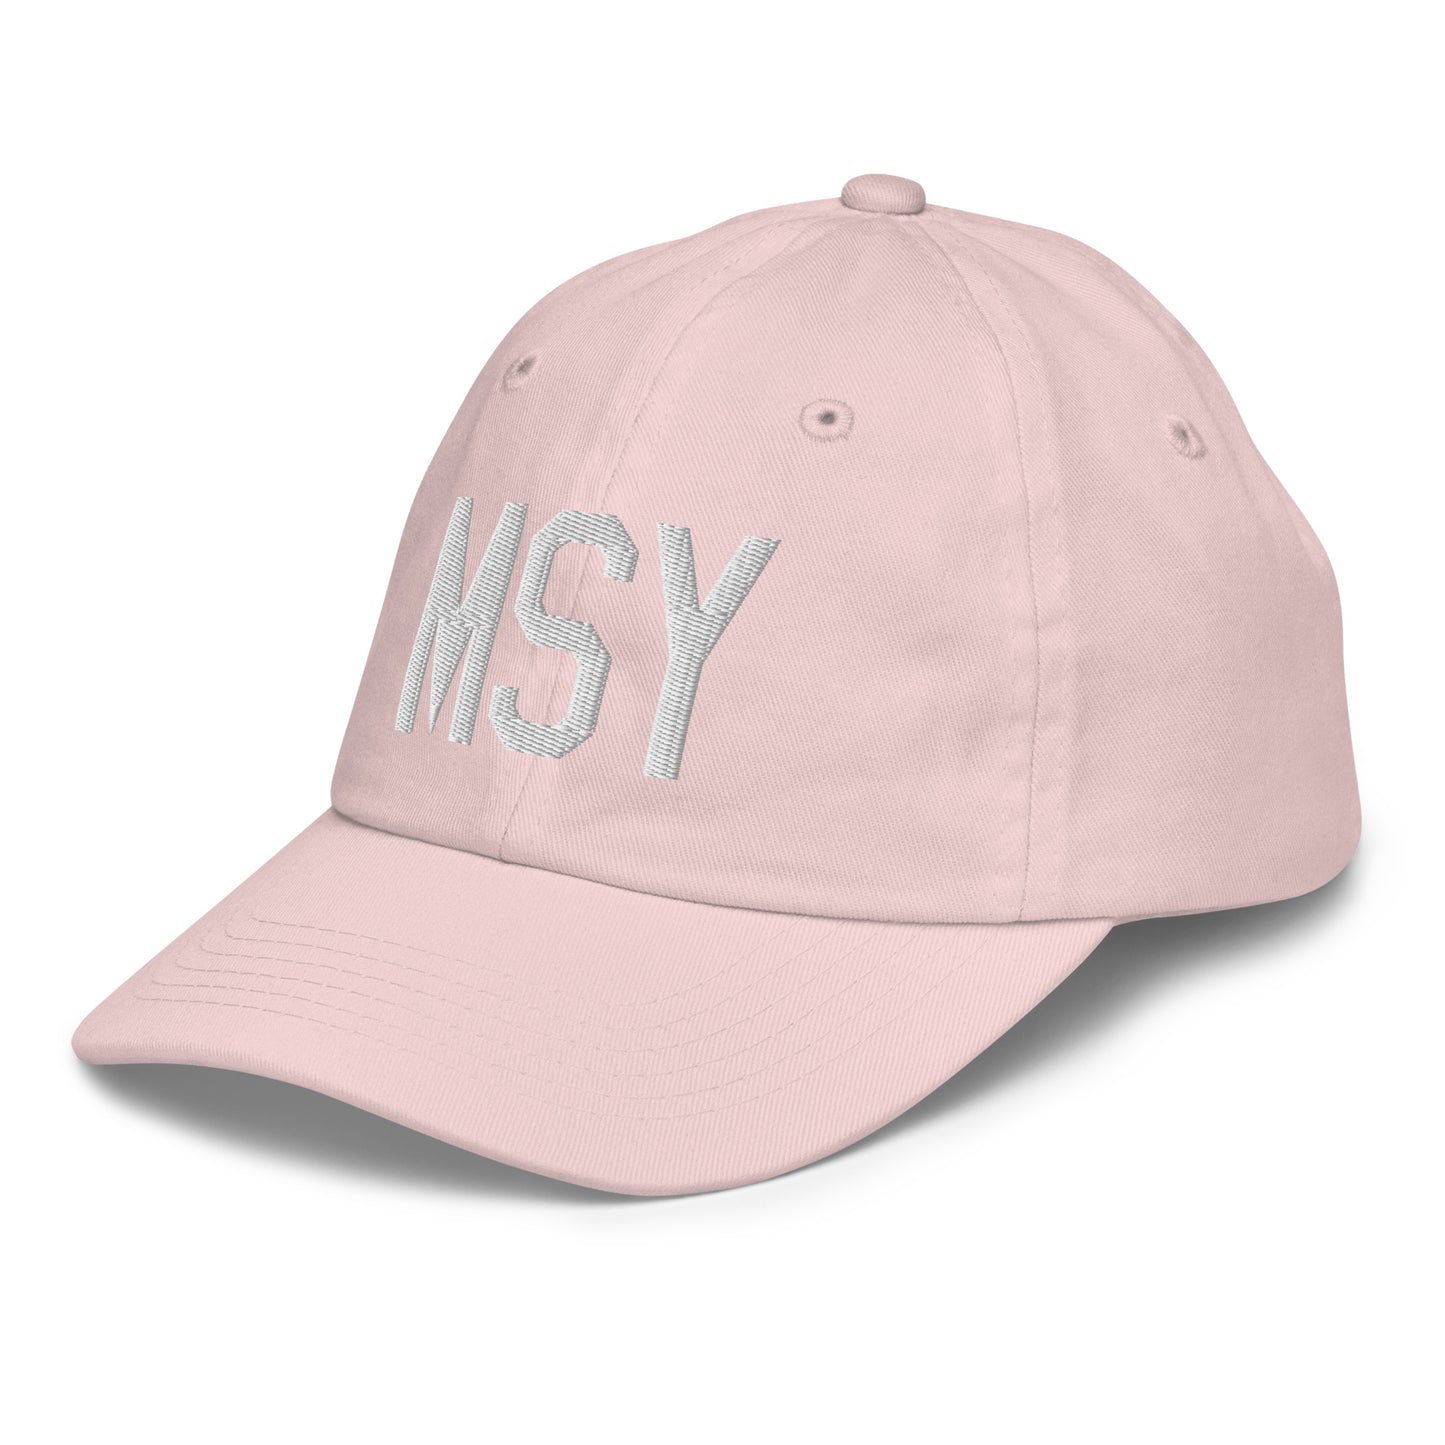 Airport Code Kid's Baseball Cap - White • MSY New Orleans • YHM Designs - Image 33